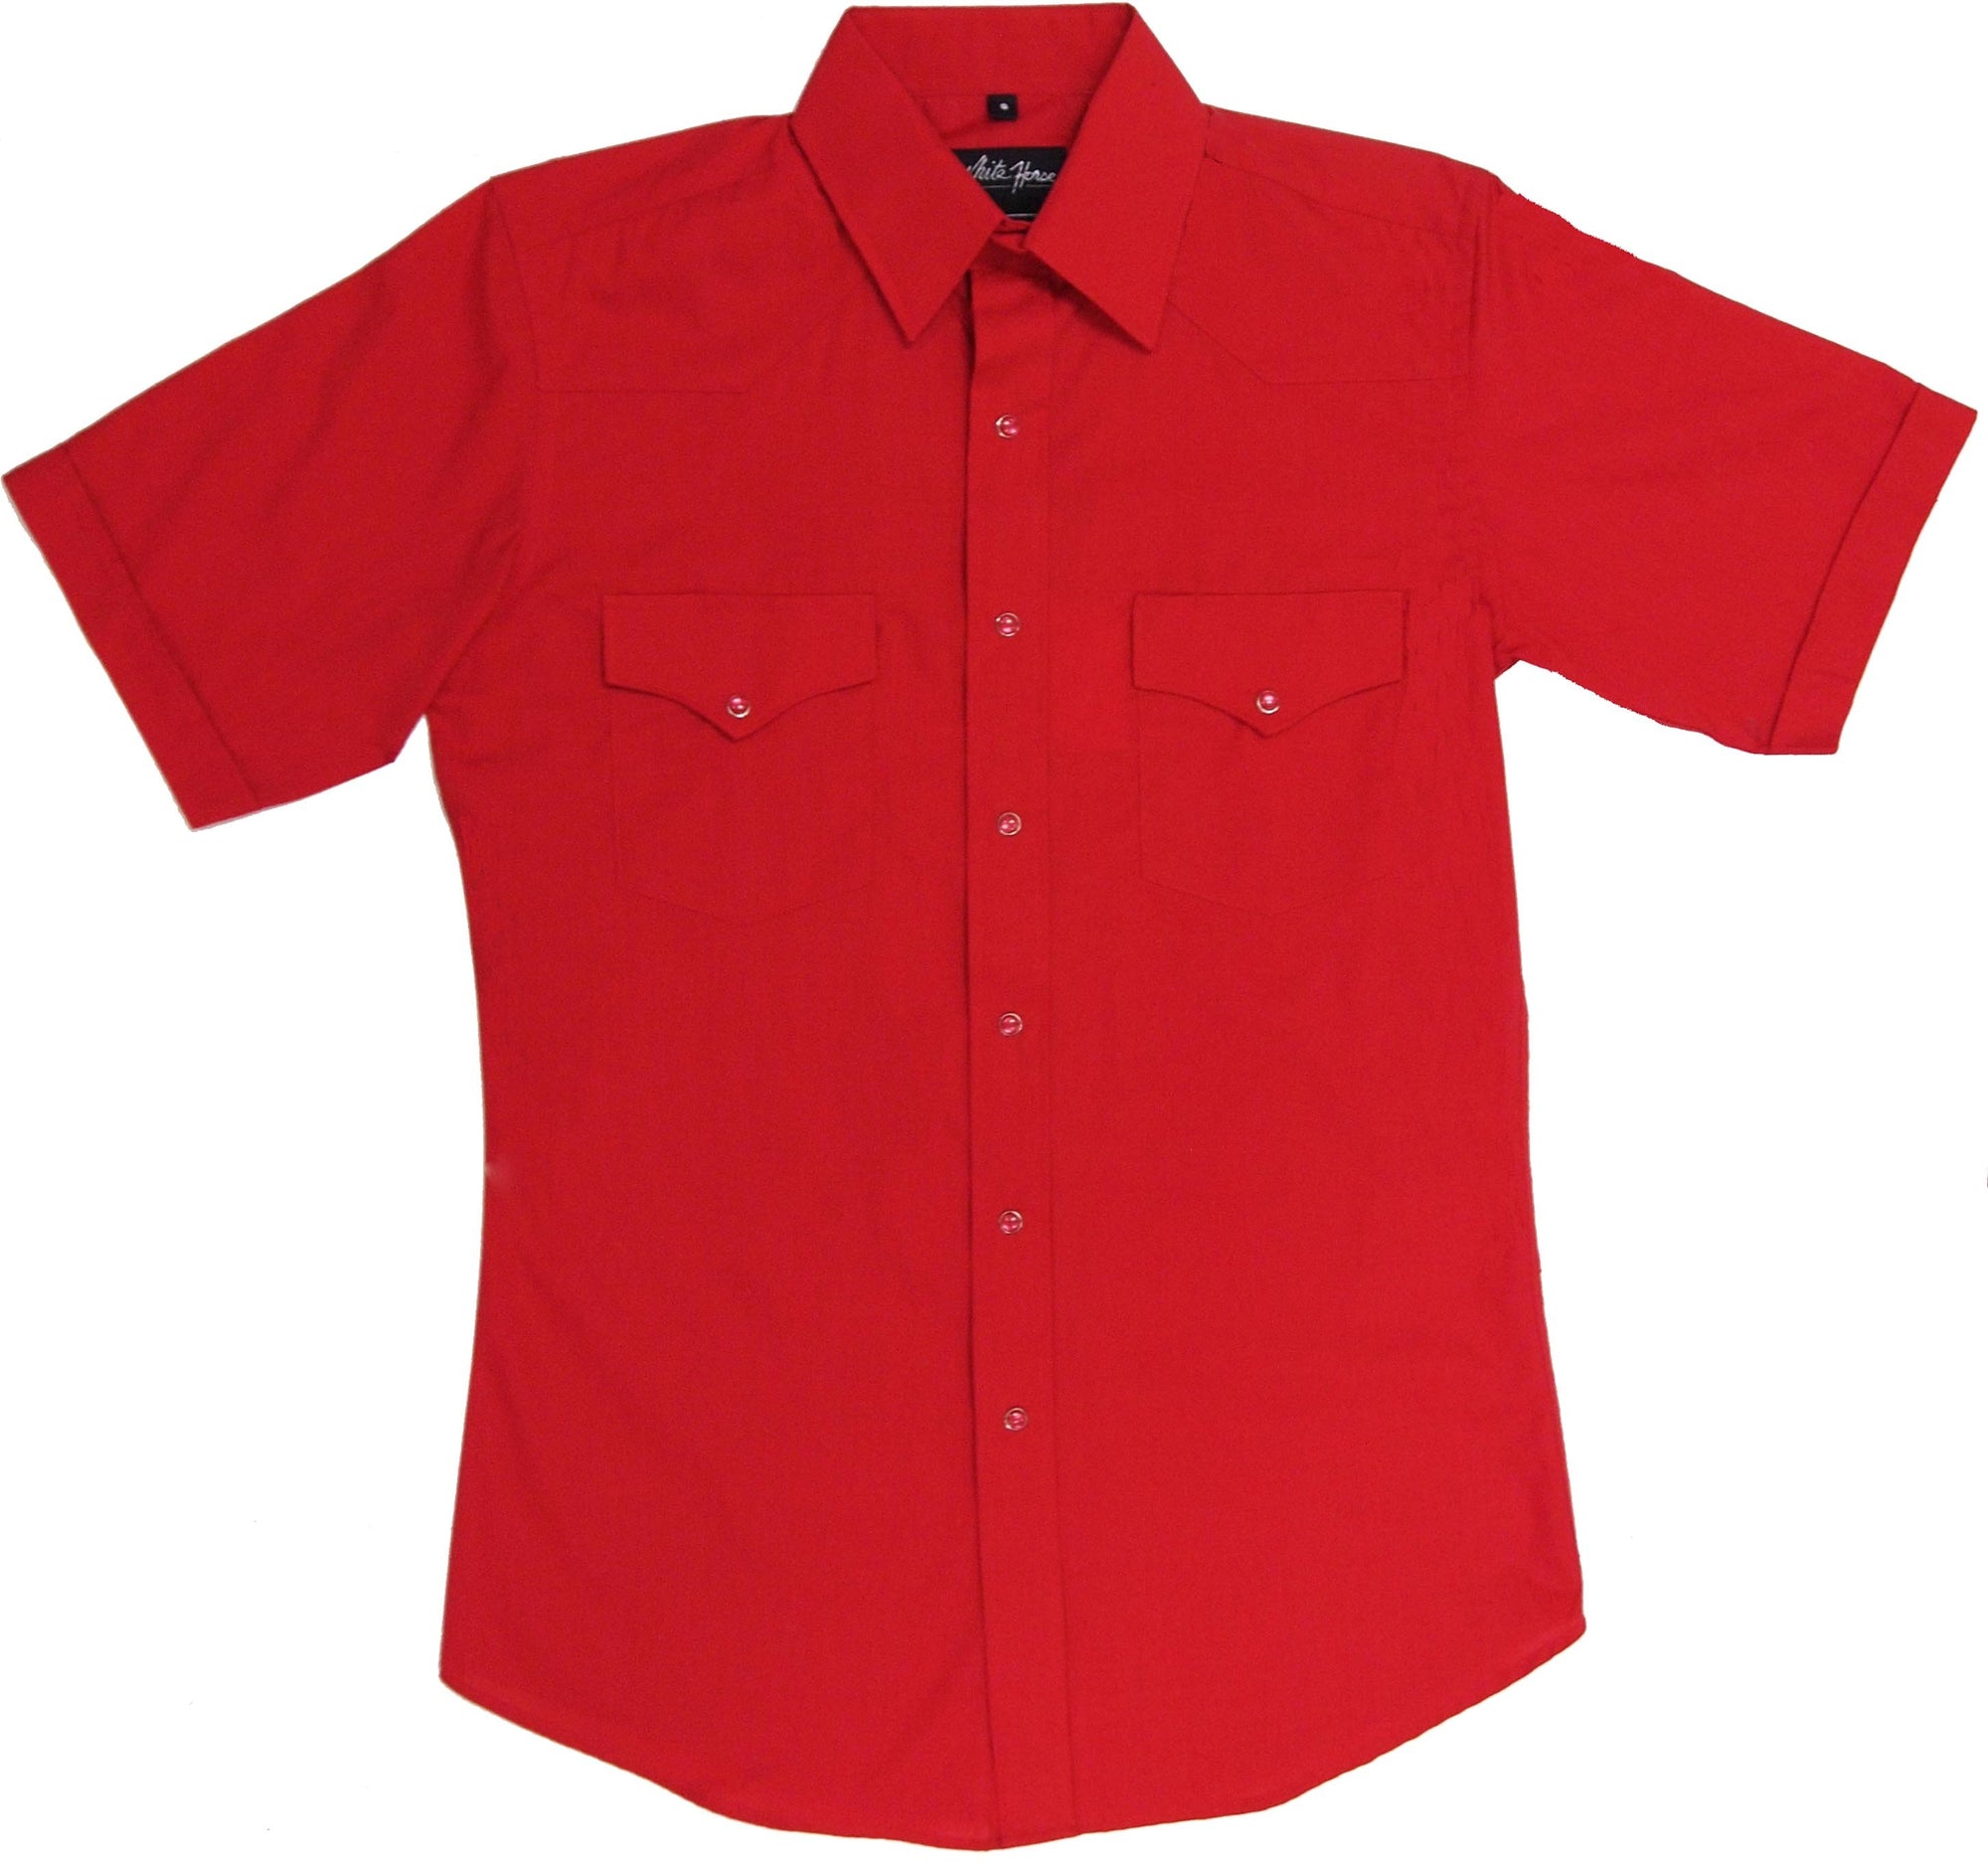 White Horse Apparel Men's Western Short Sleeve Shirt Solid Red